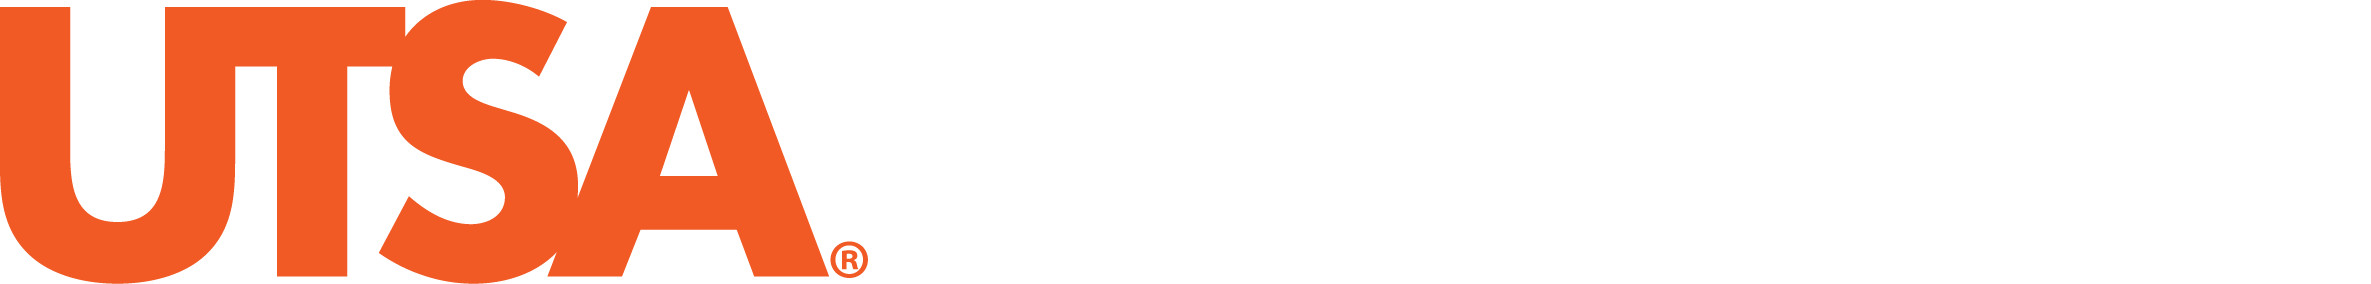 research_footer_logo.png